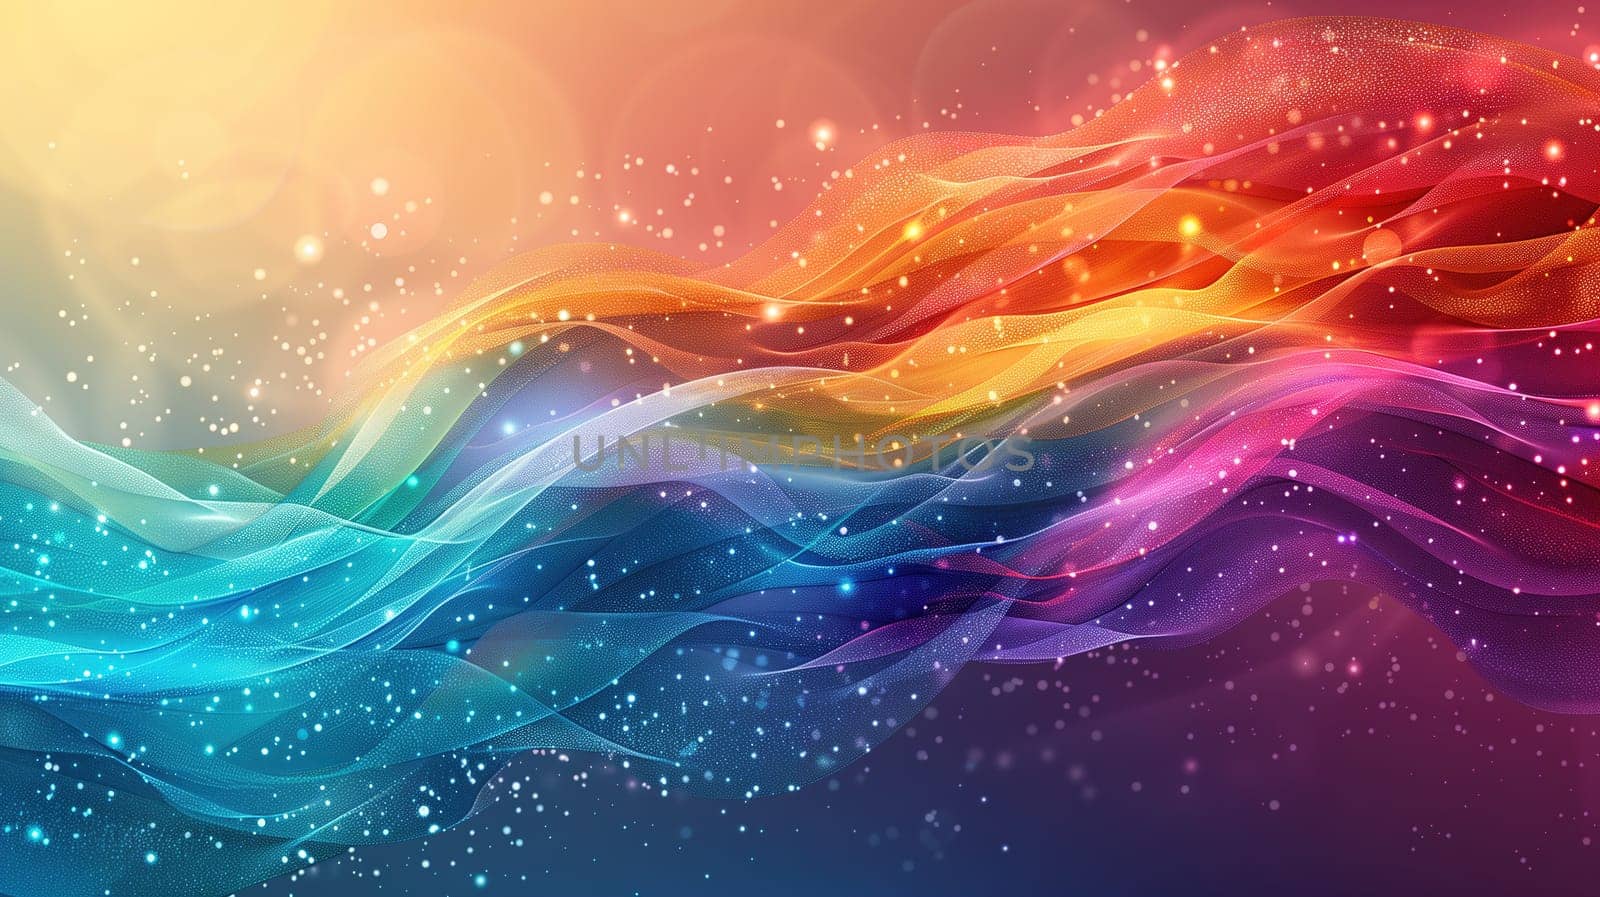 The abstract background features vibrant waves and stars in a colorful display. The waves flow dynamically across the image, creating a sense of movement and energy. Contrasting hues and patterns enhance the overall visual impact.